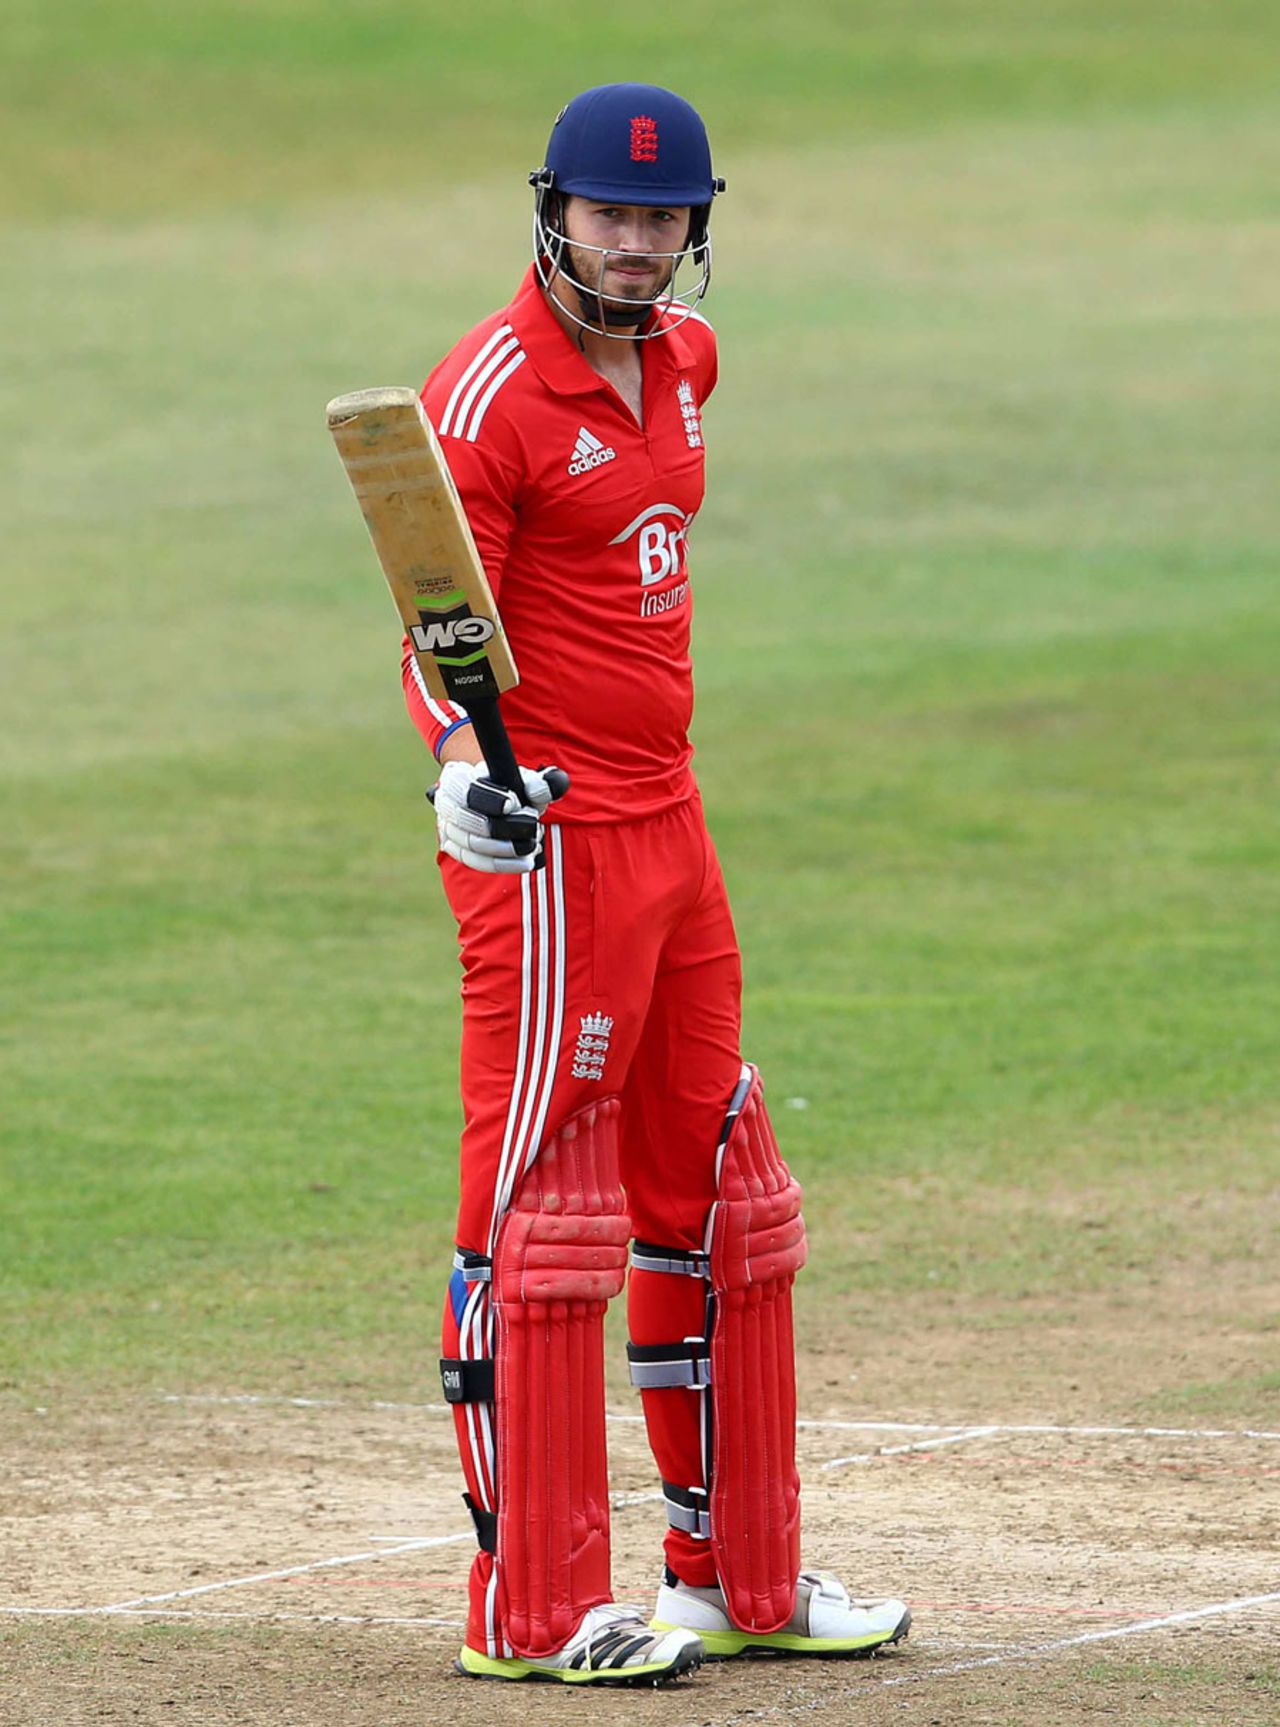 James Vince acknowledges his half-century, England Lions v Bangladesh A, 3rd unofficial ODI, Taunton, August 23, 2013